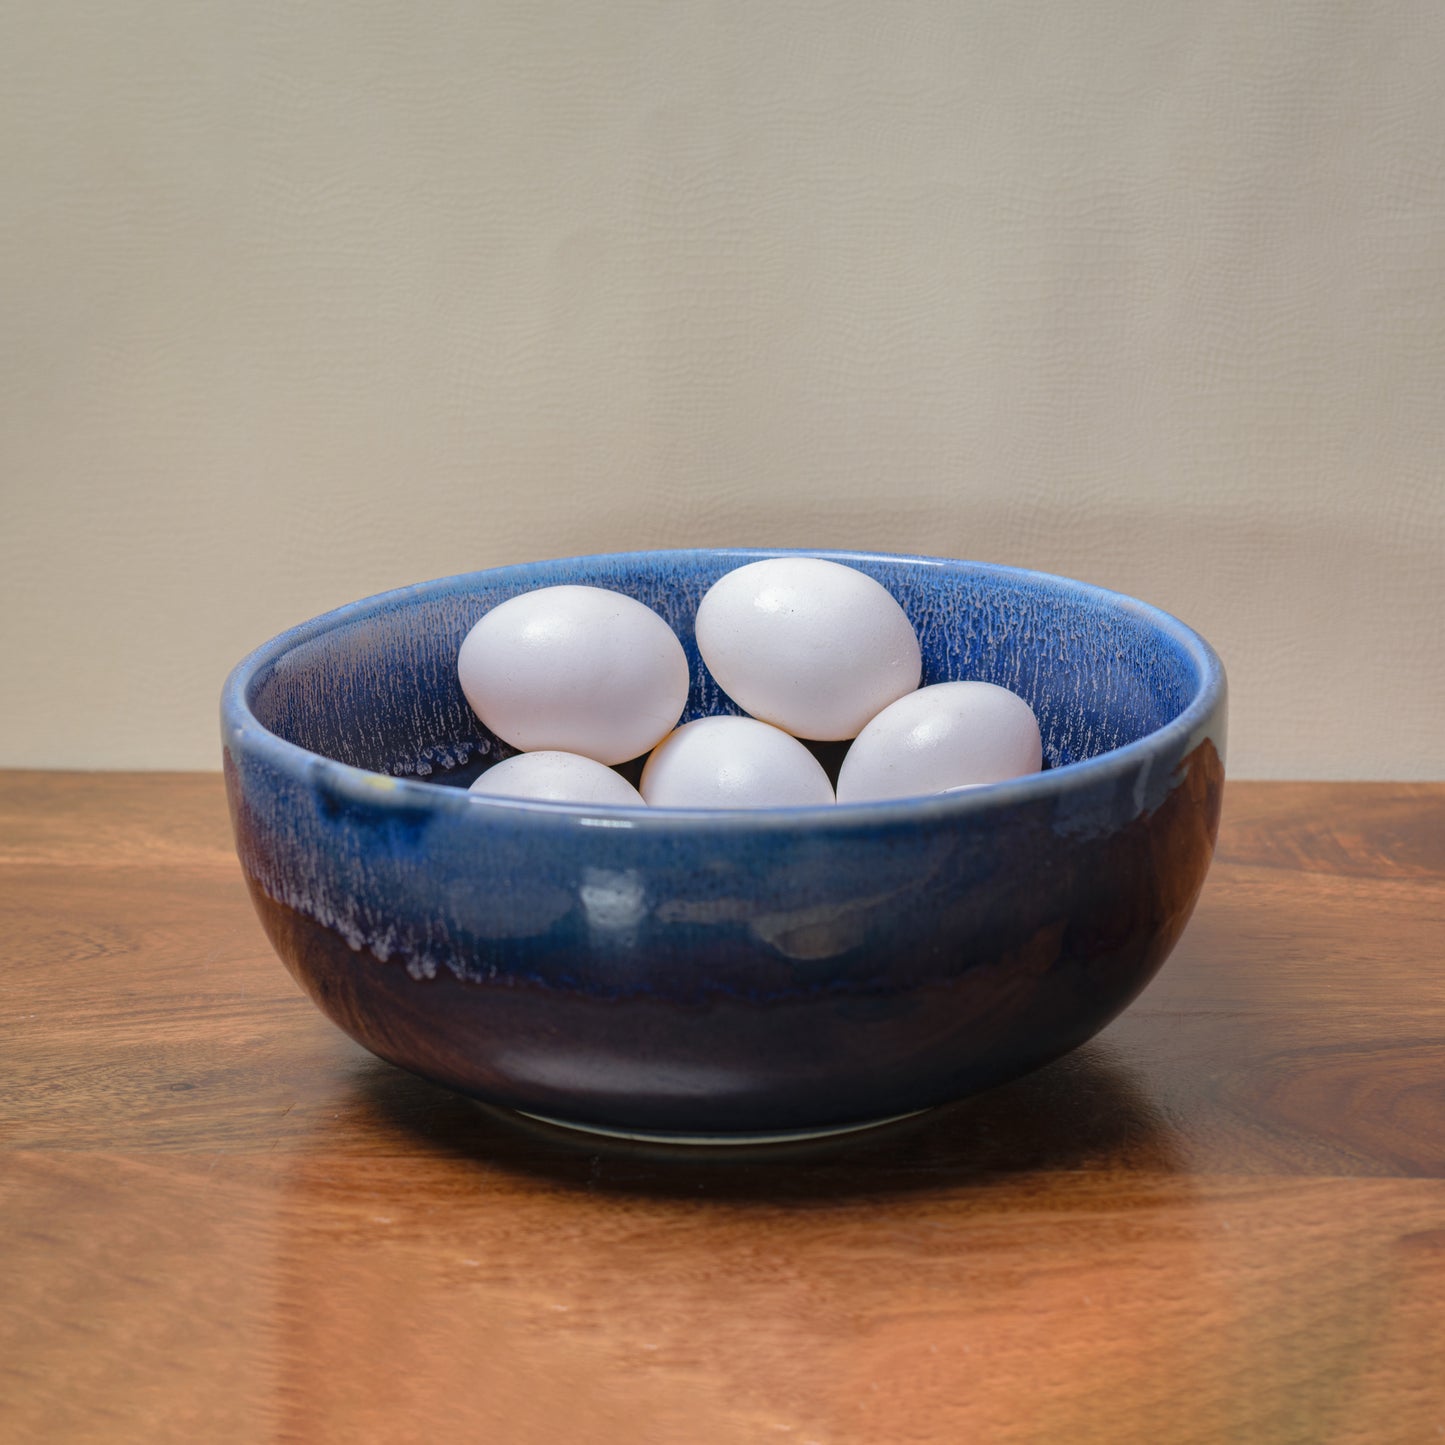 A large ceramic bowl with shades of blue glaze inside and out, eggs inside. Shop artistic ceramics in India.